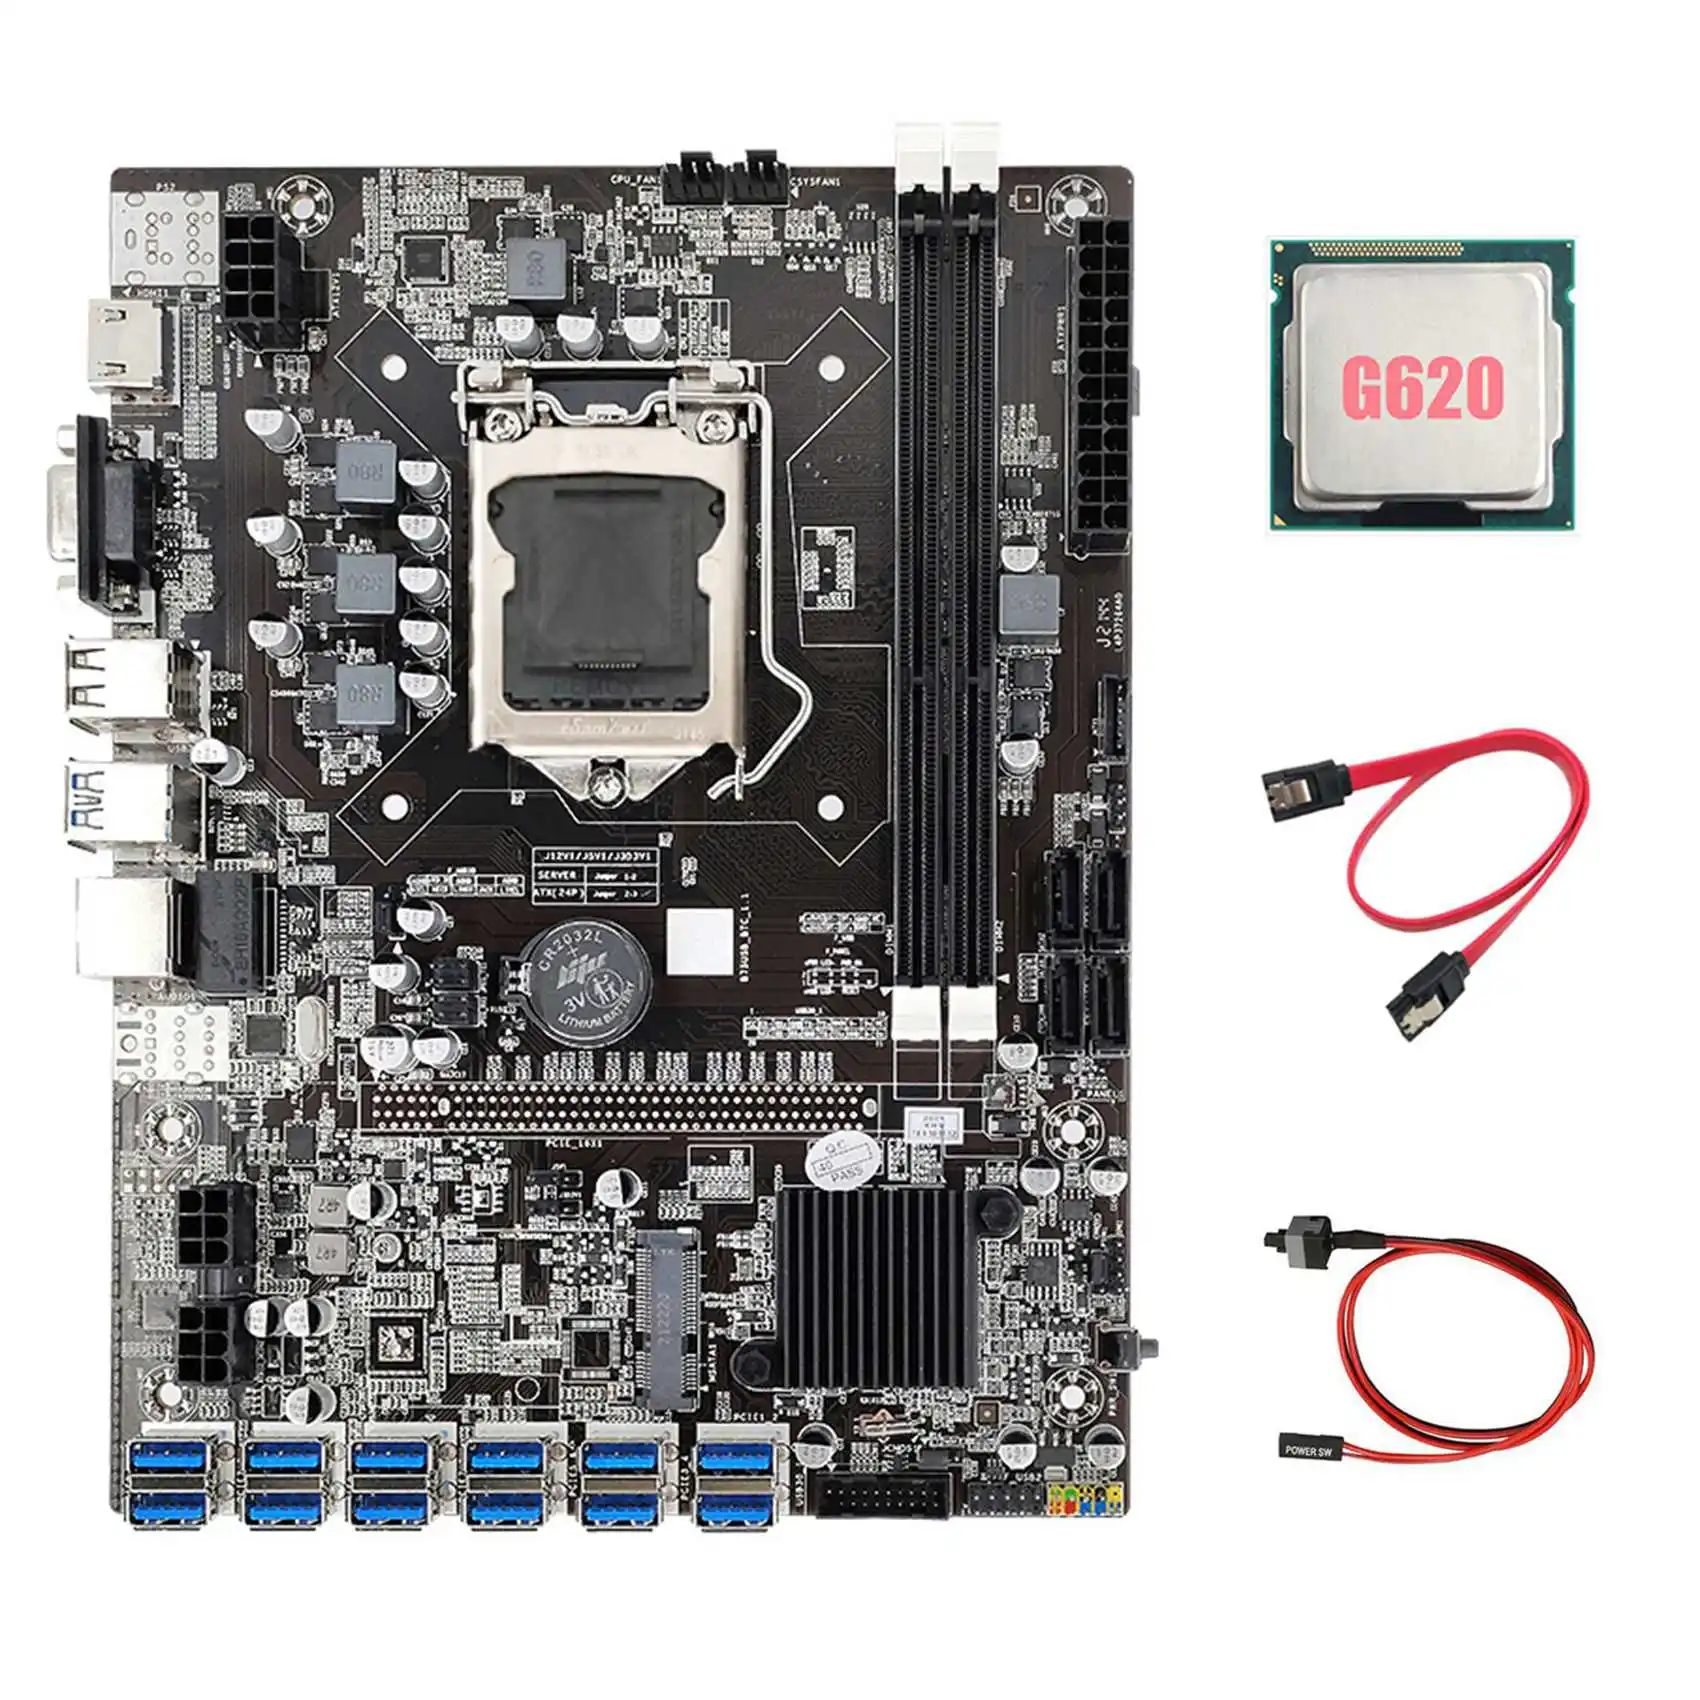 B75 ETH Mining Motherboard+G620 CPU+Switch Cable+SATA Cable LGA1155 12 PCIE to USB MSATA DDR3 B75 USB BTC Motherboard